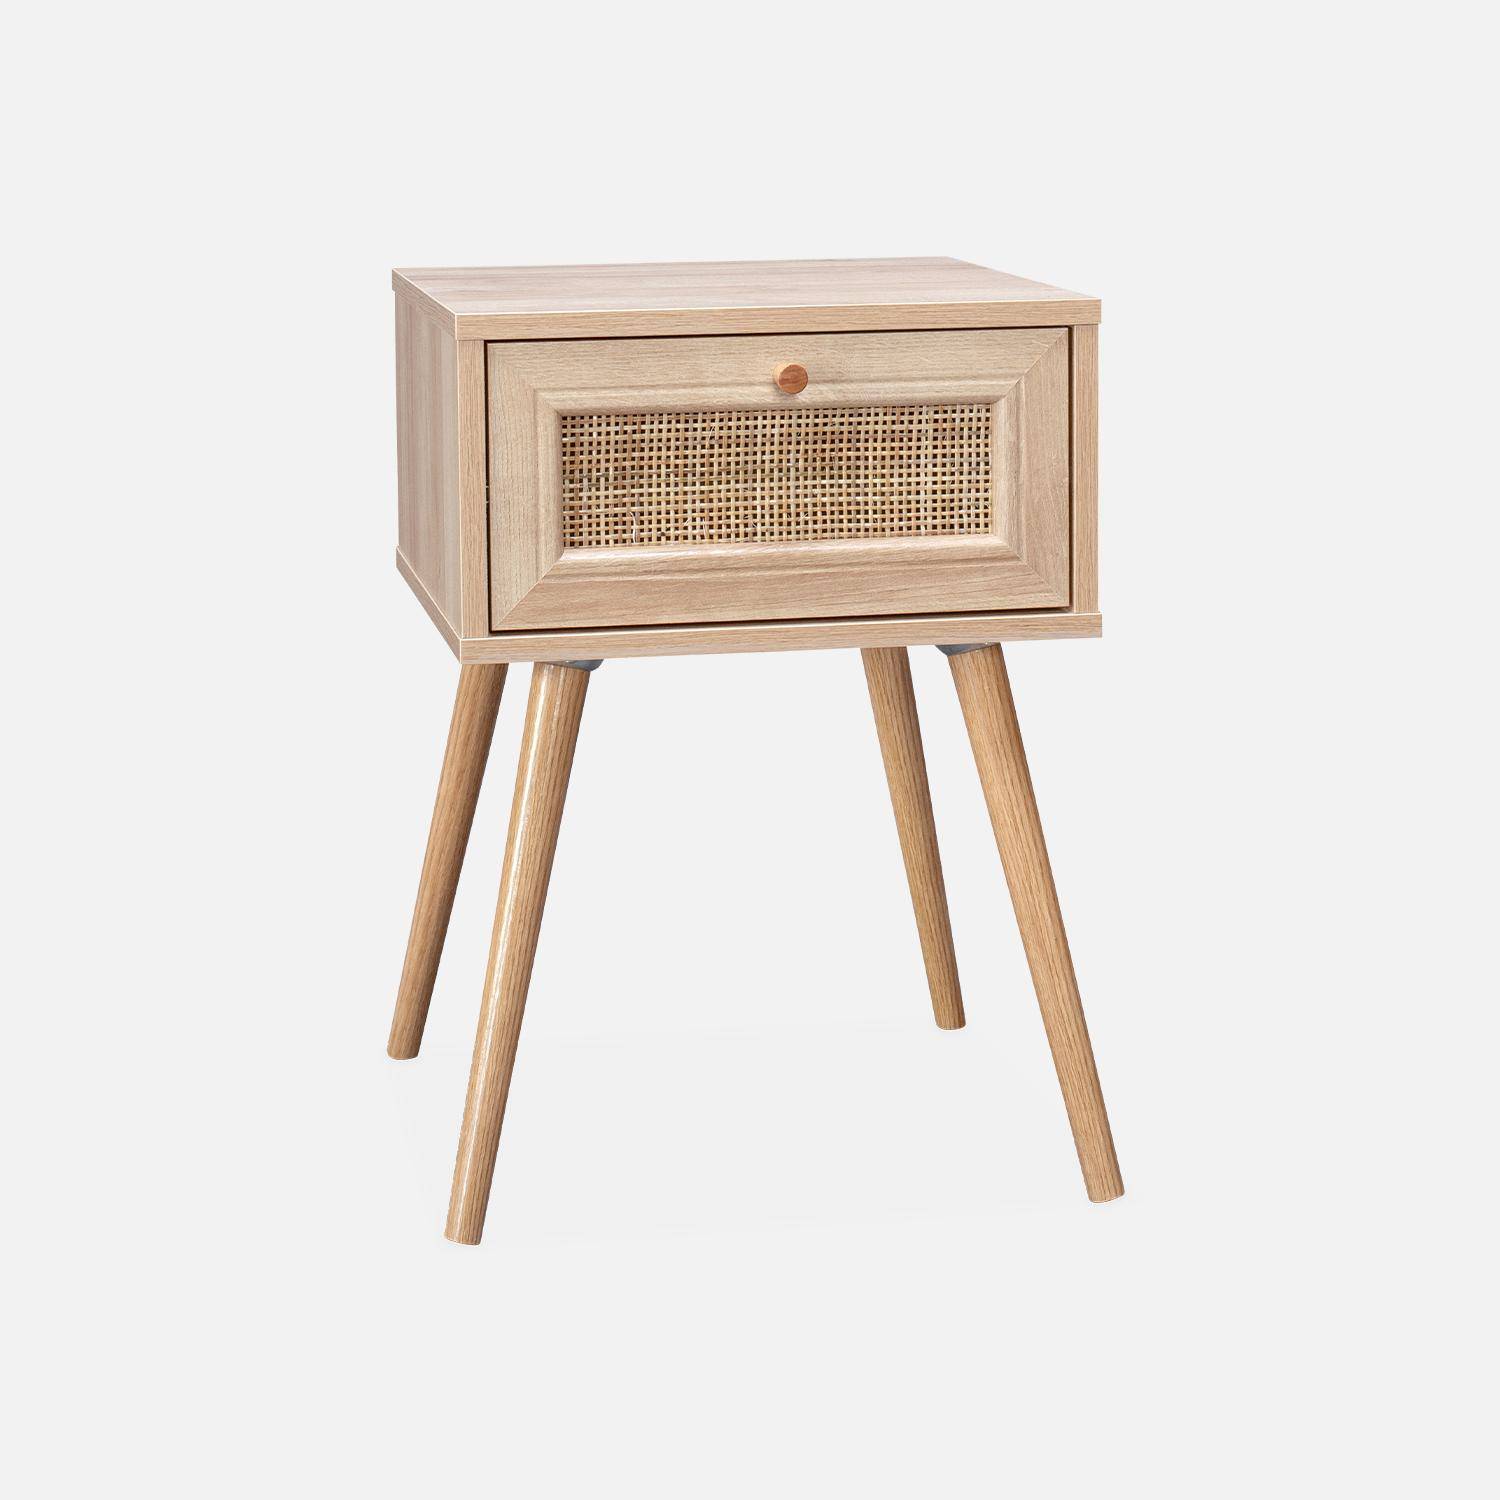 Woven rattan bedside table with drawer, 39x39x55.4cm - Boheme - Natural Wood colour Photo3